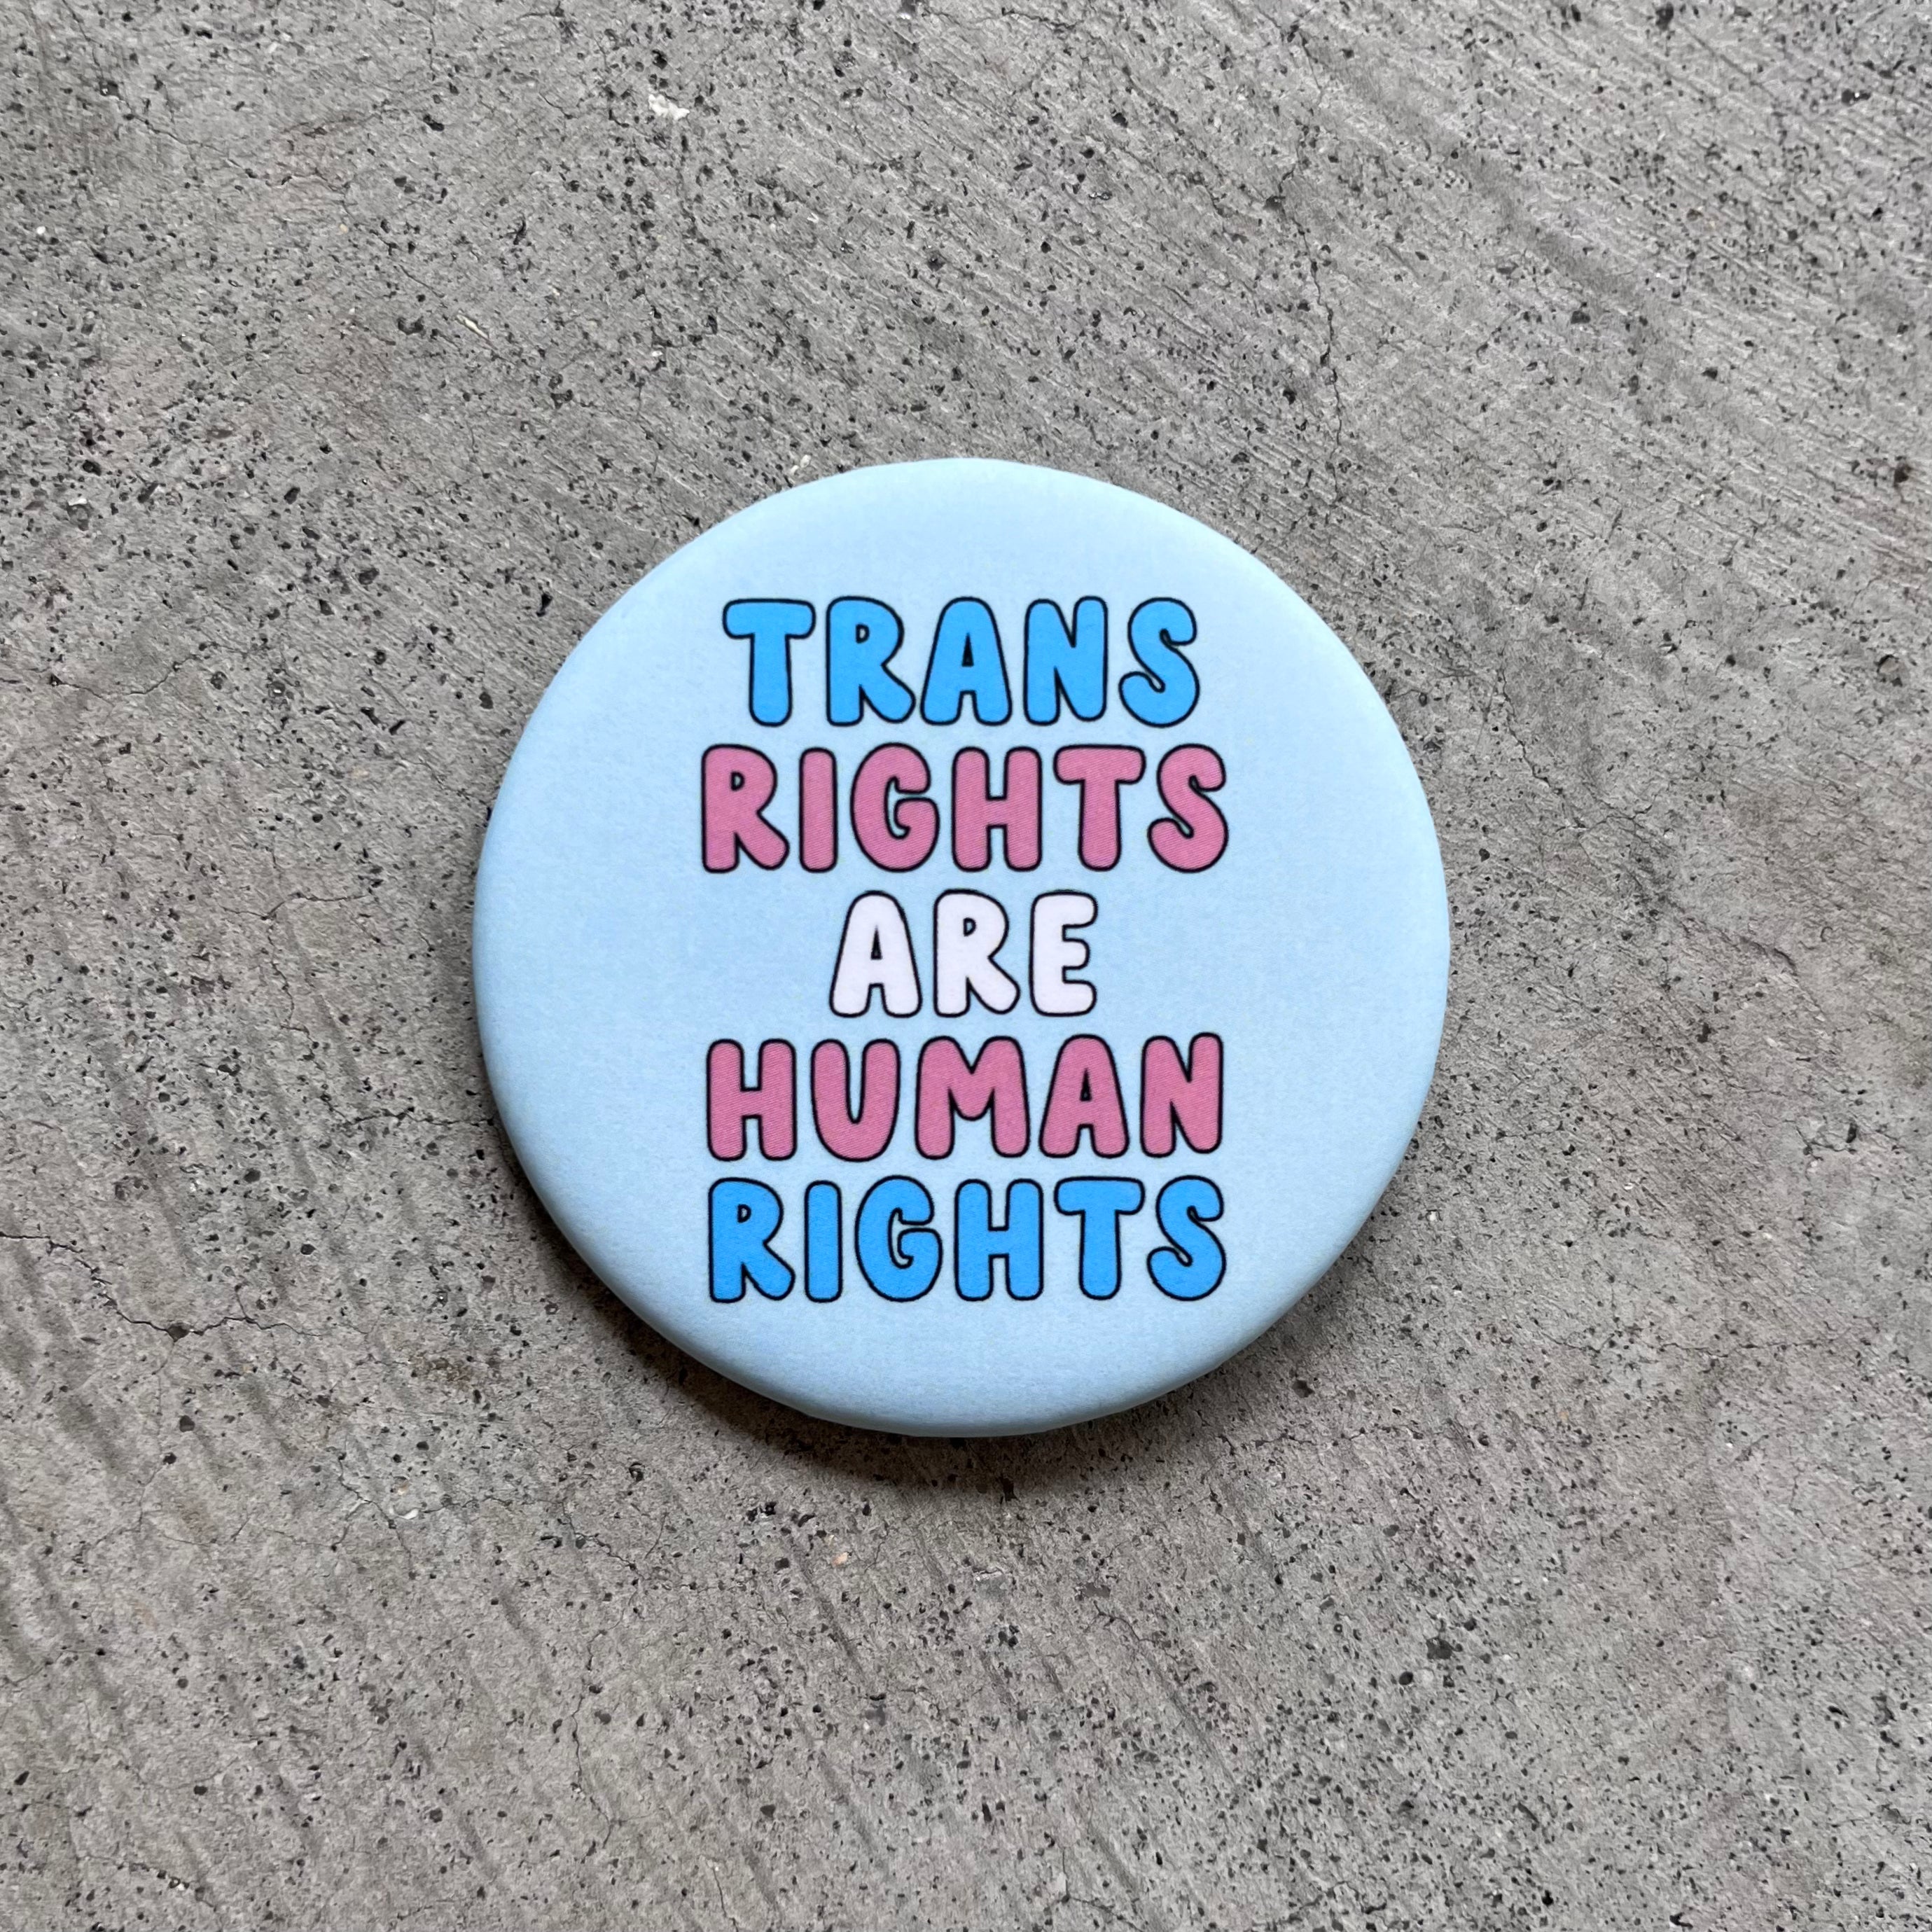 Round, Light Blue button with "Trans Rights Are Human Rights" in the colors of the Trans flag